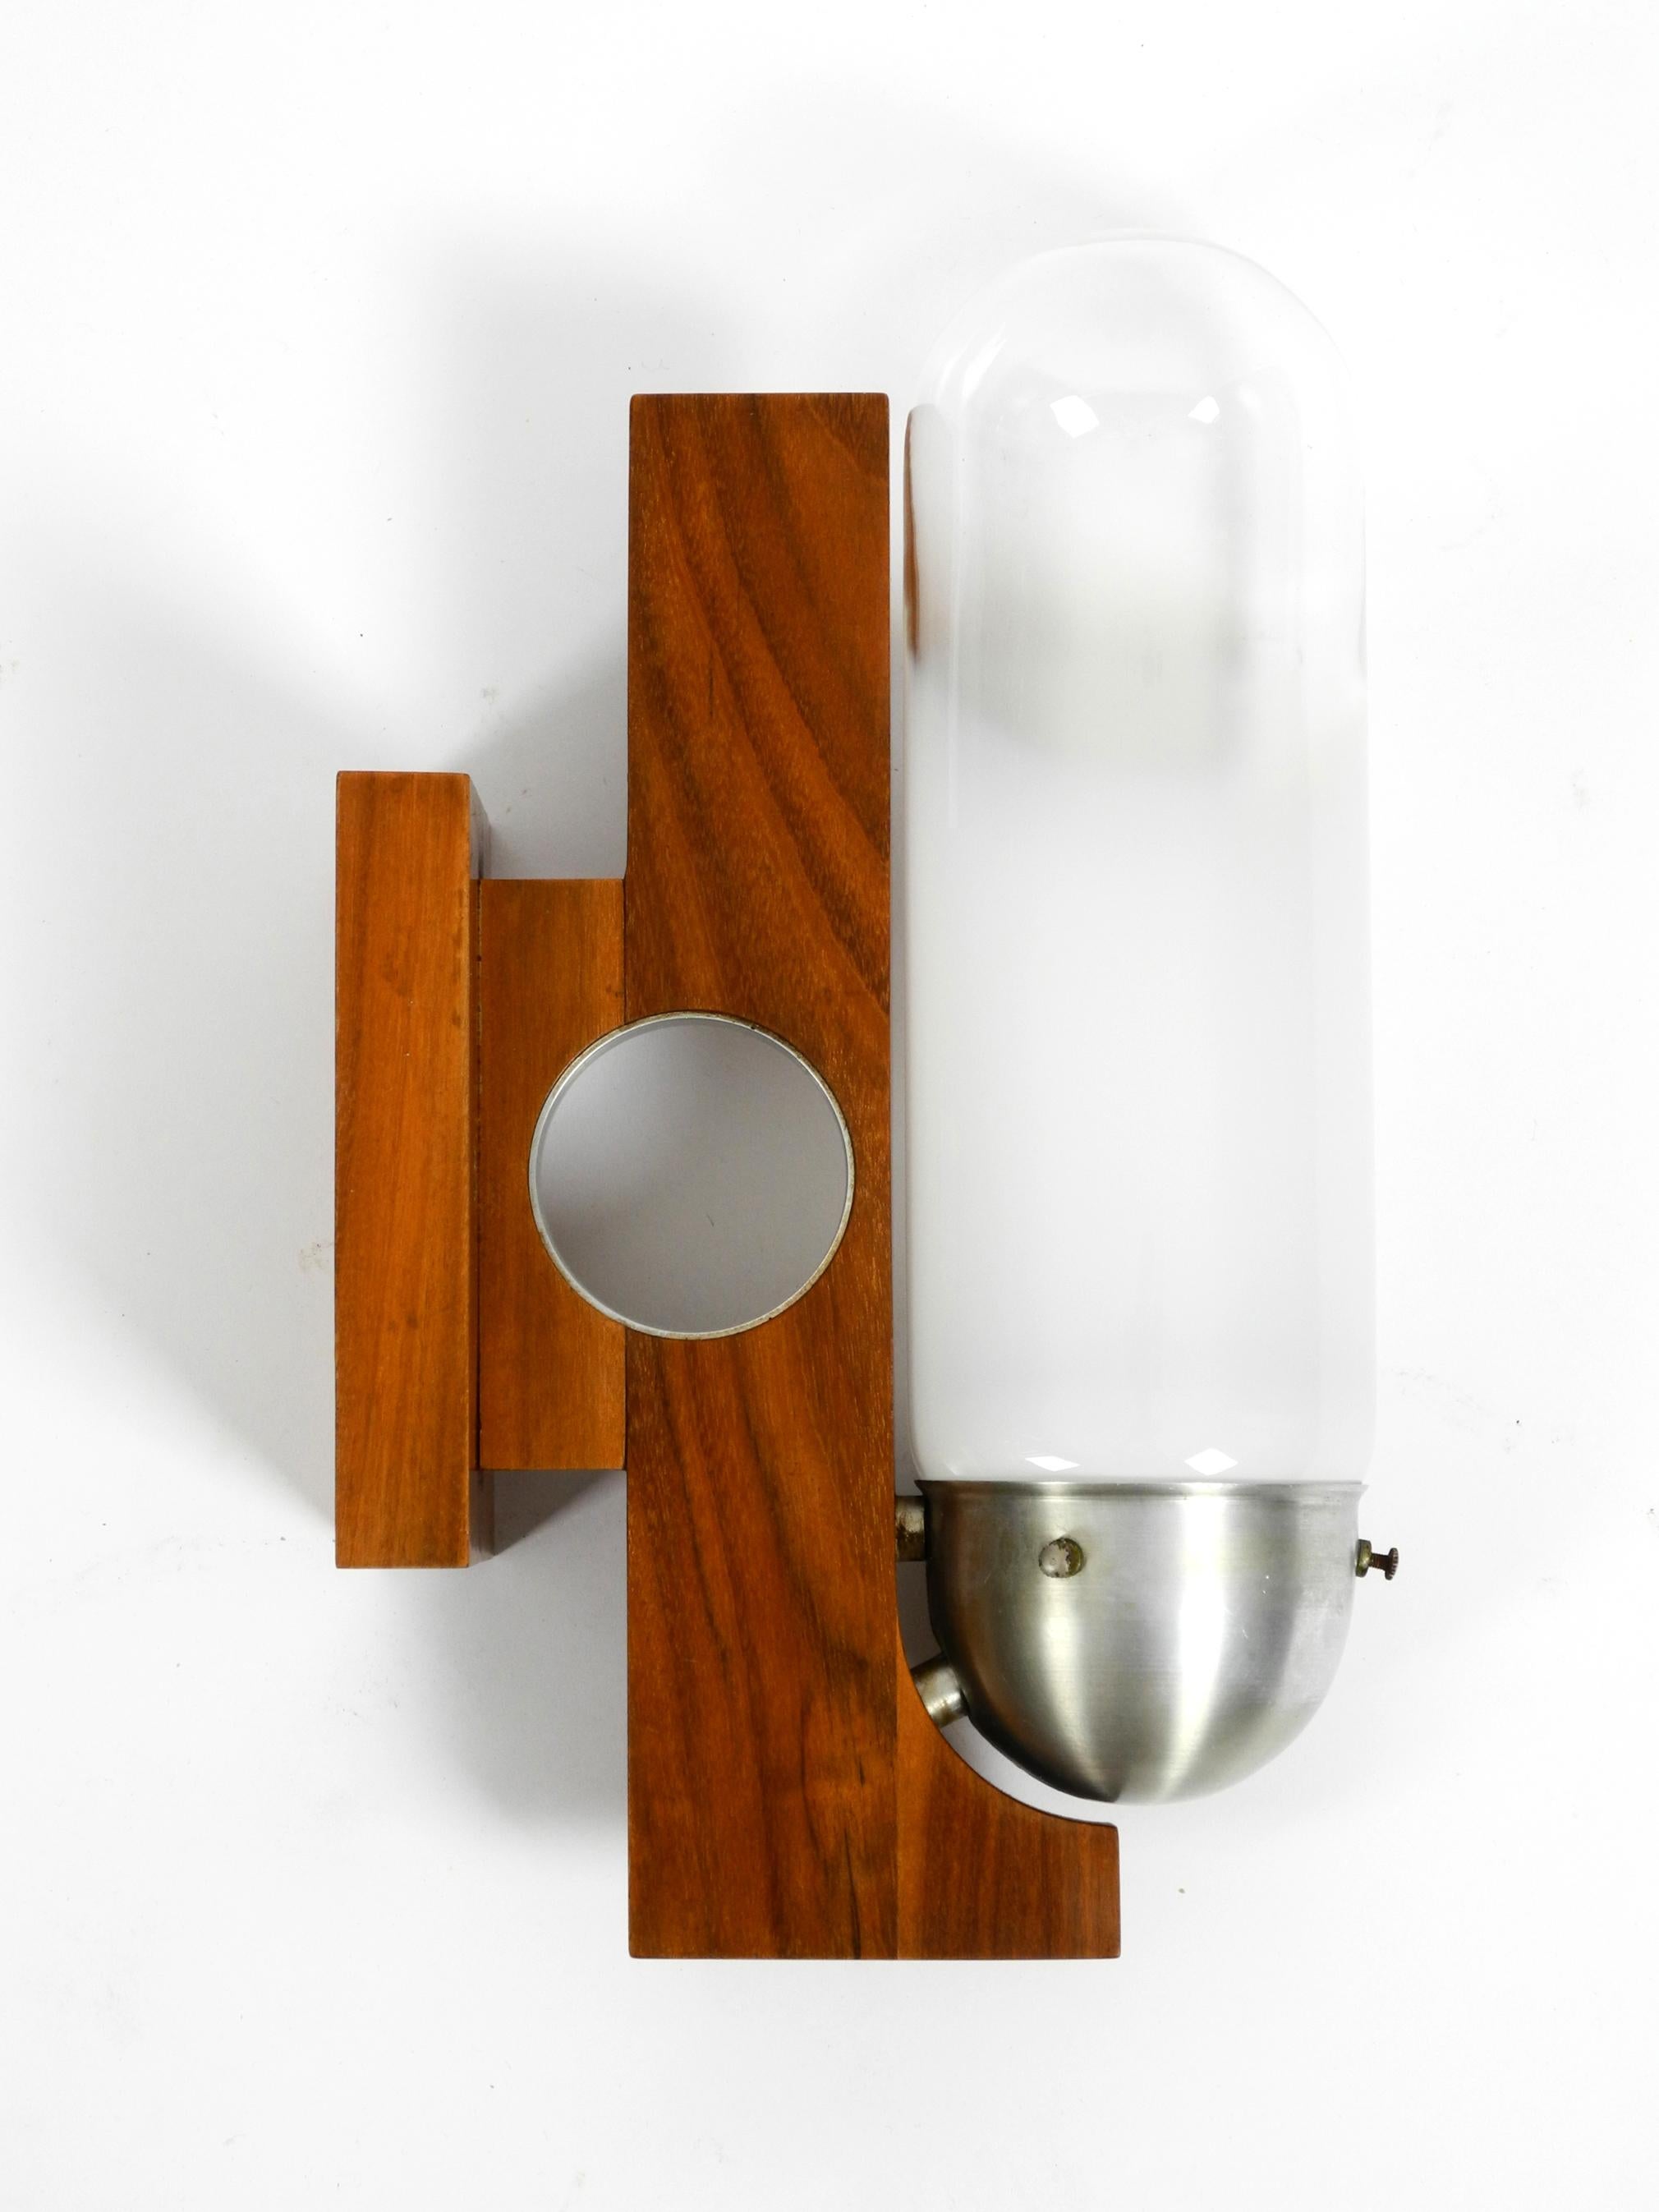 Rare Mid-Century Modern Wood Wall Lamp with Glass Shade in Art Deco Design  6